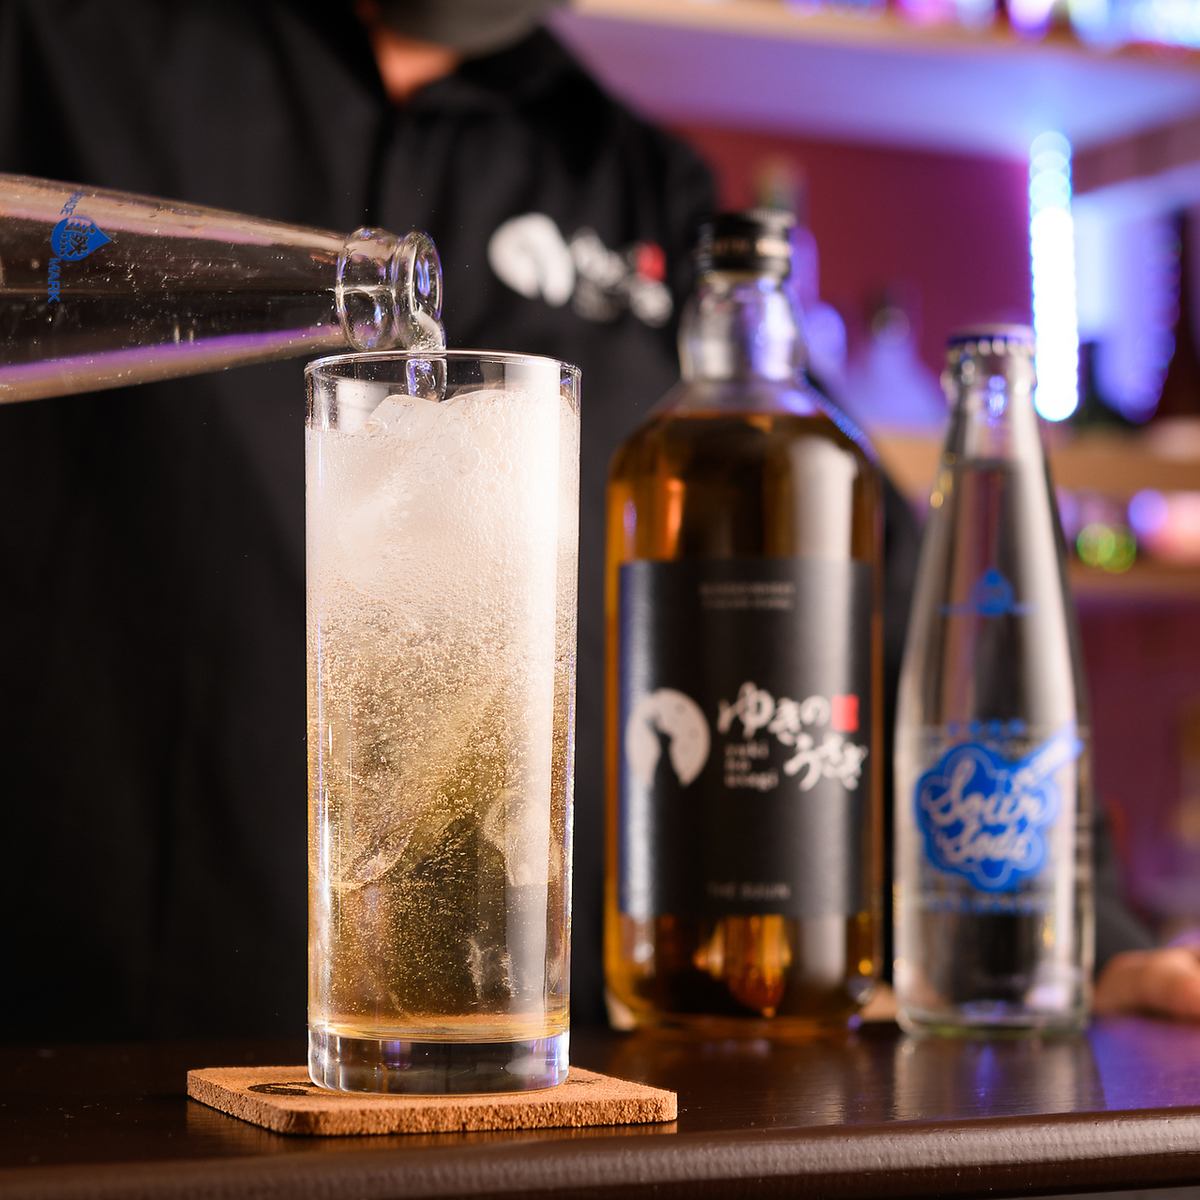 Enjoy your time with our original highball.